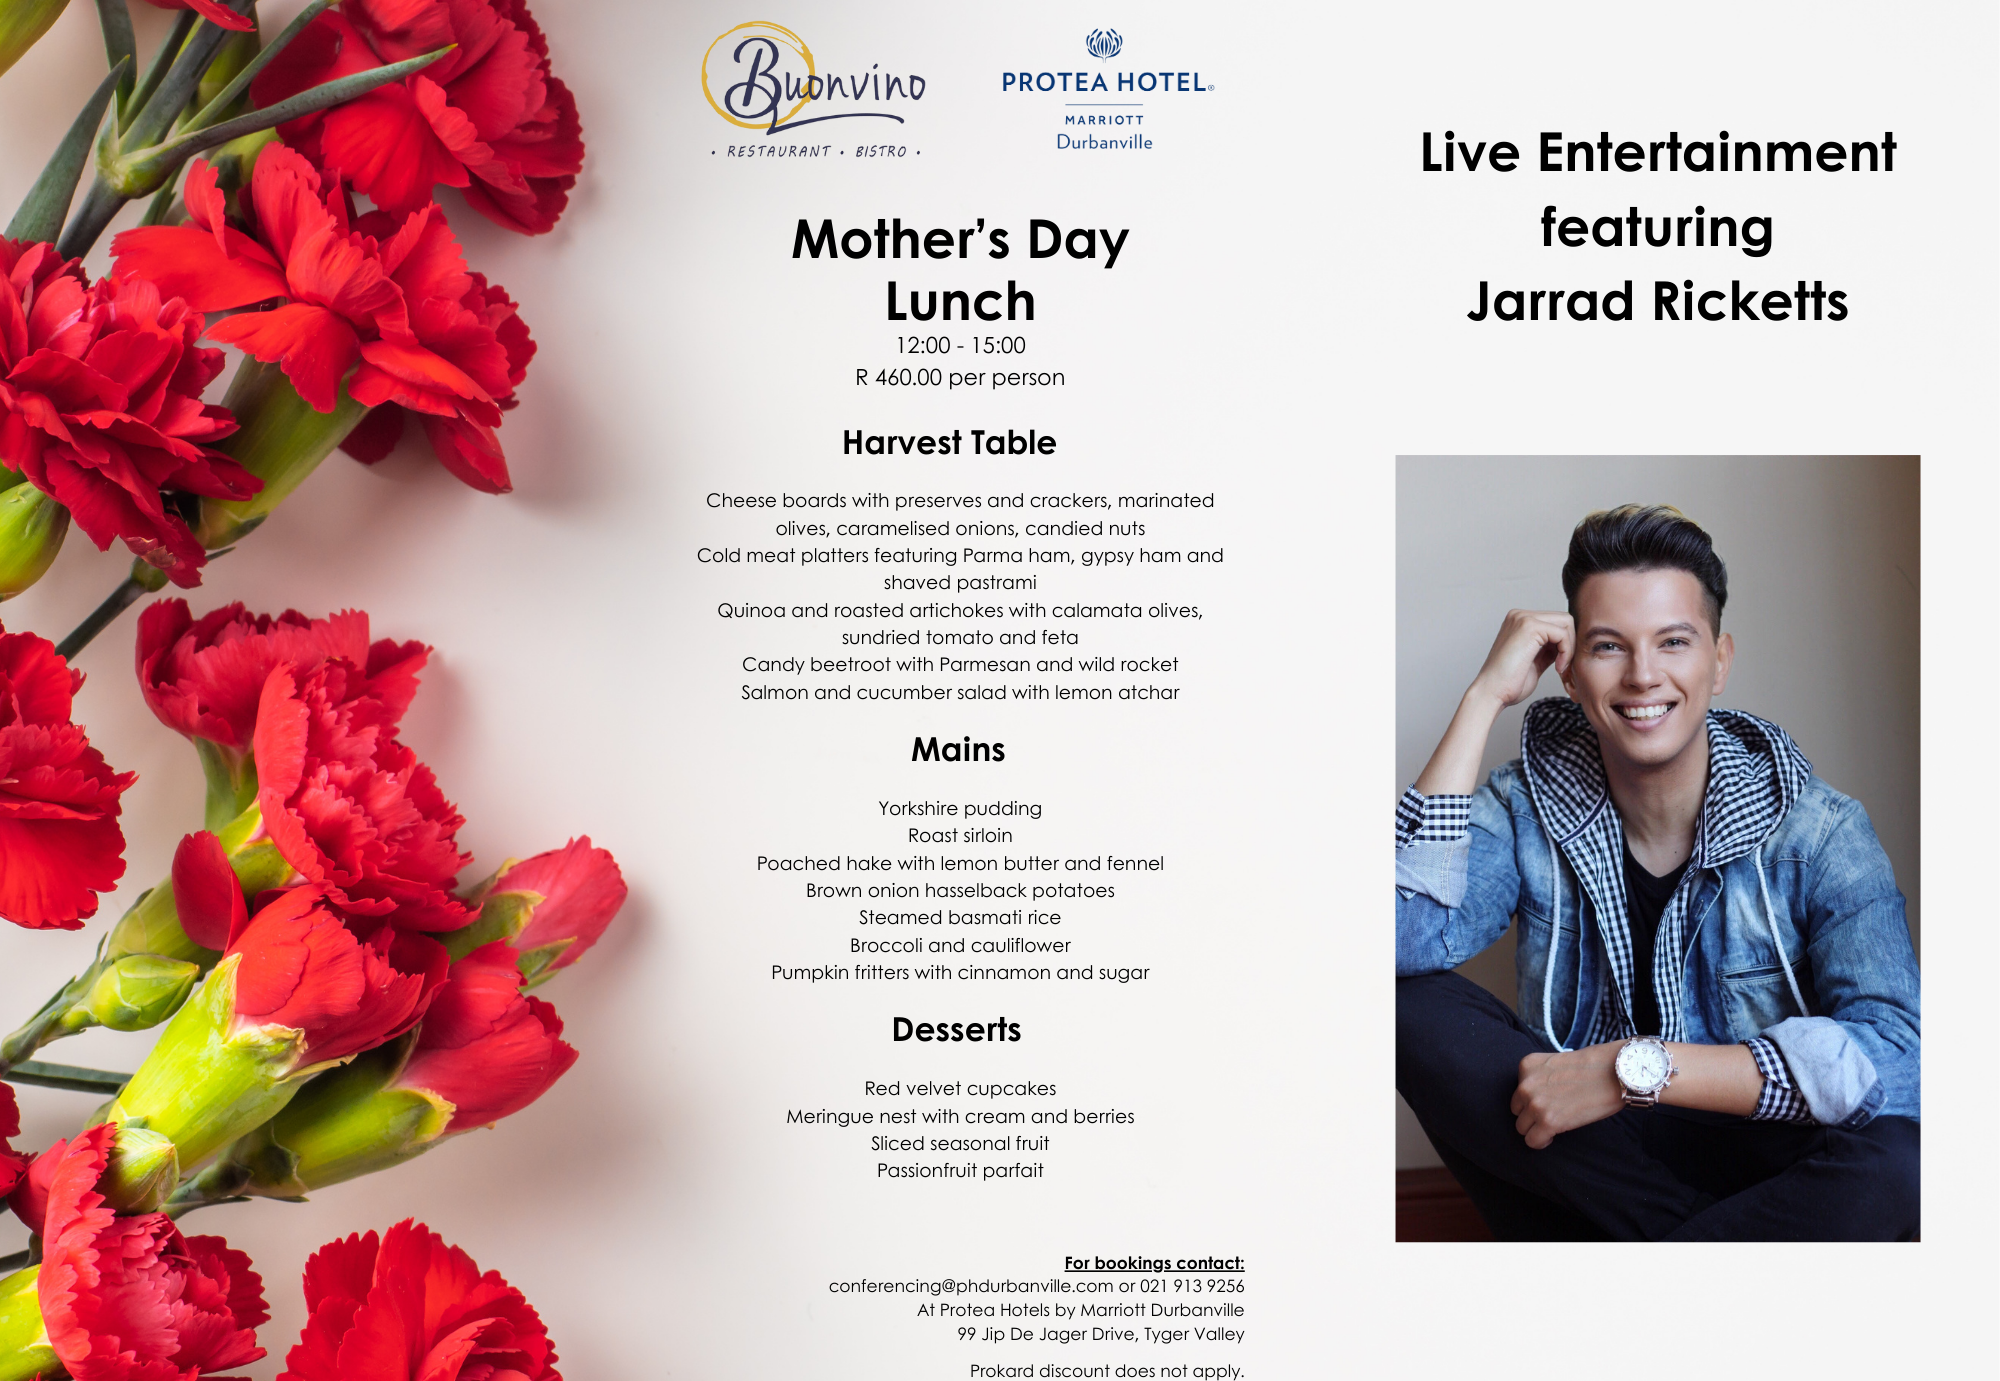 BON Appetits | Mother’s Day Lunch at Buonvino   Protea Hotels by Marriott Durbanville | R 460.00 per person Mother’s Day Lunch with Live Entertainment featuring  Jarrad Ricketts